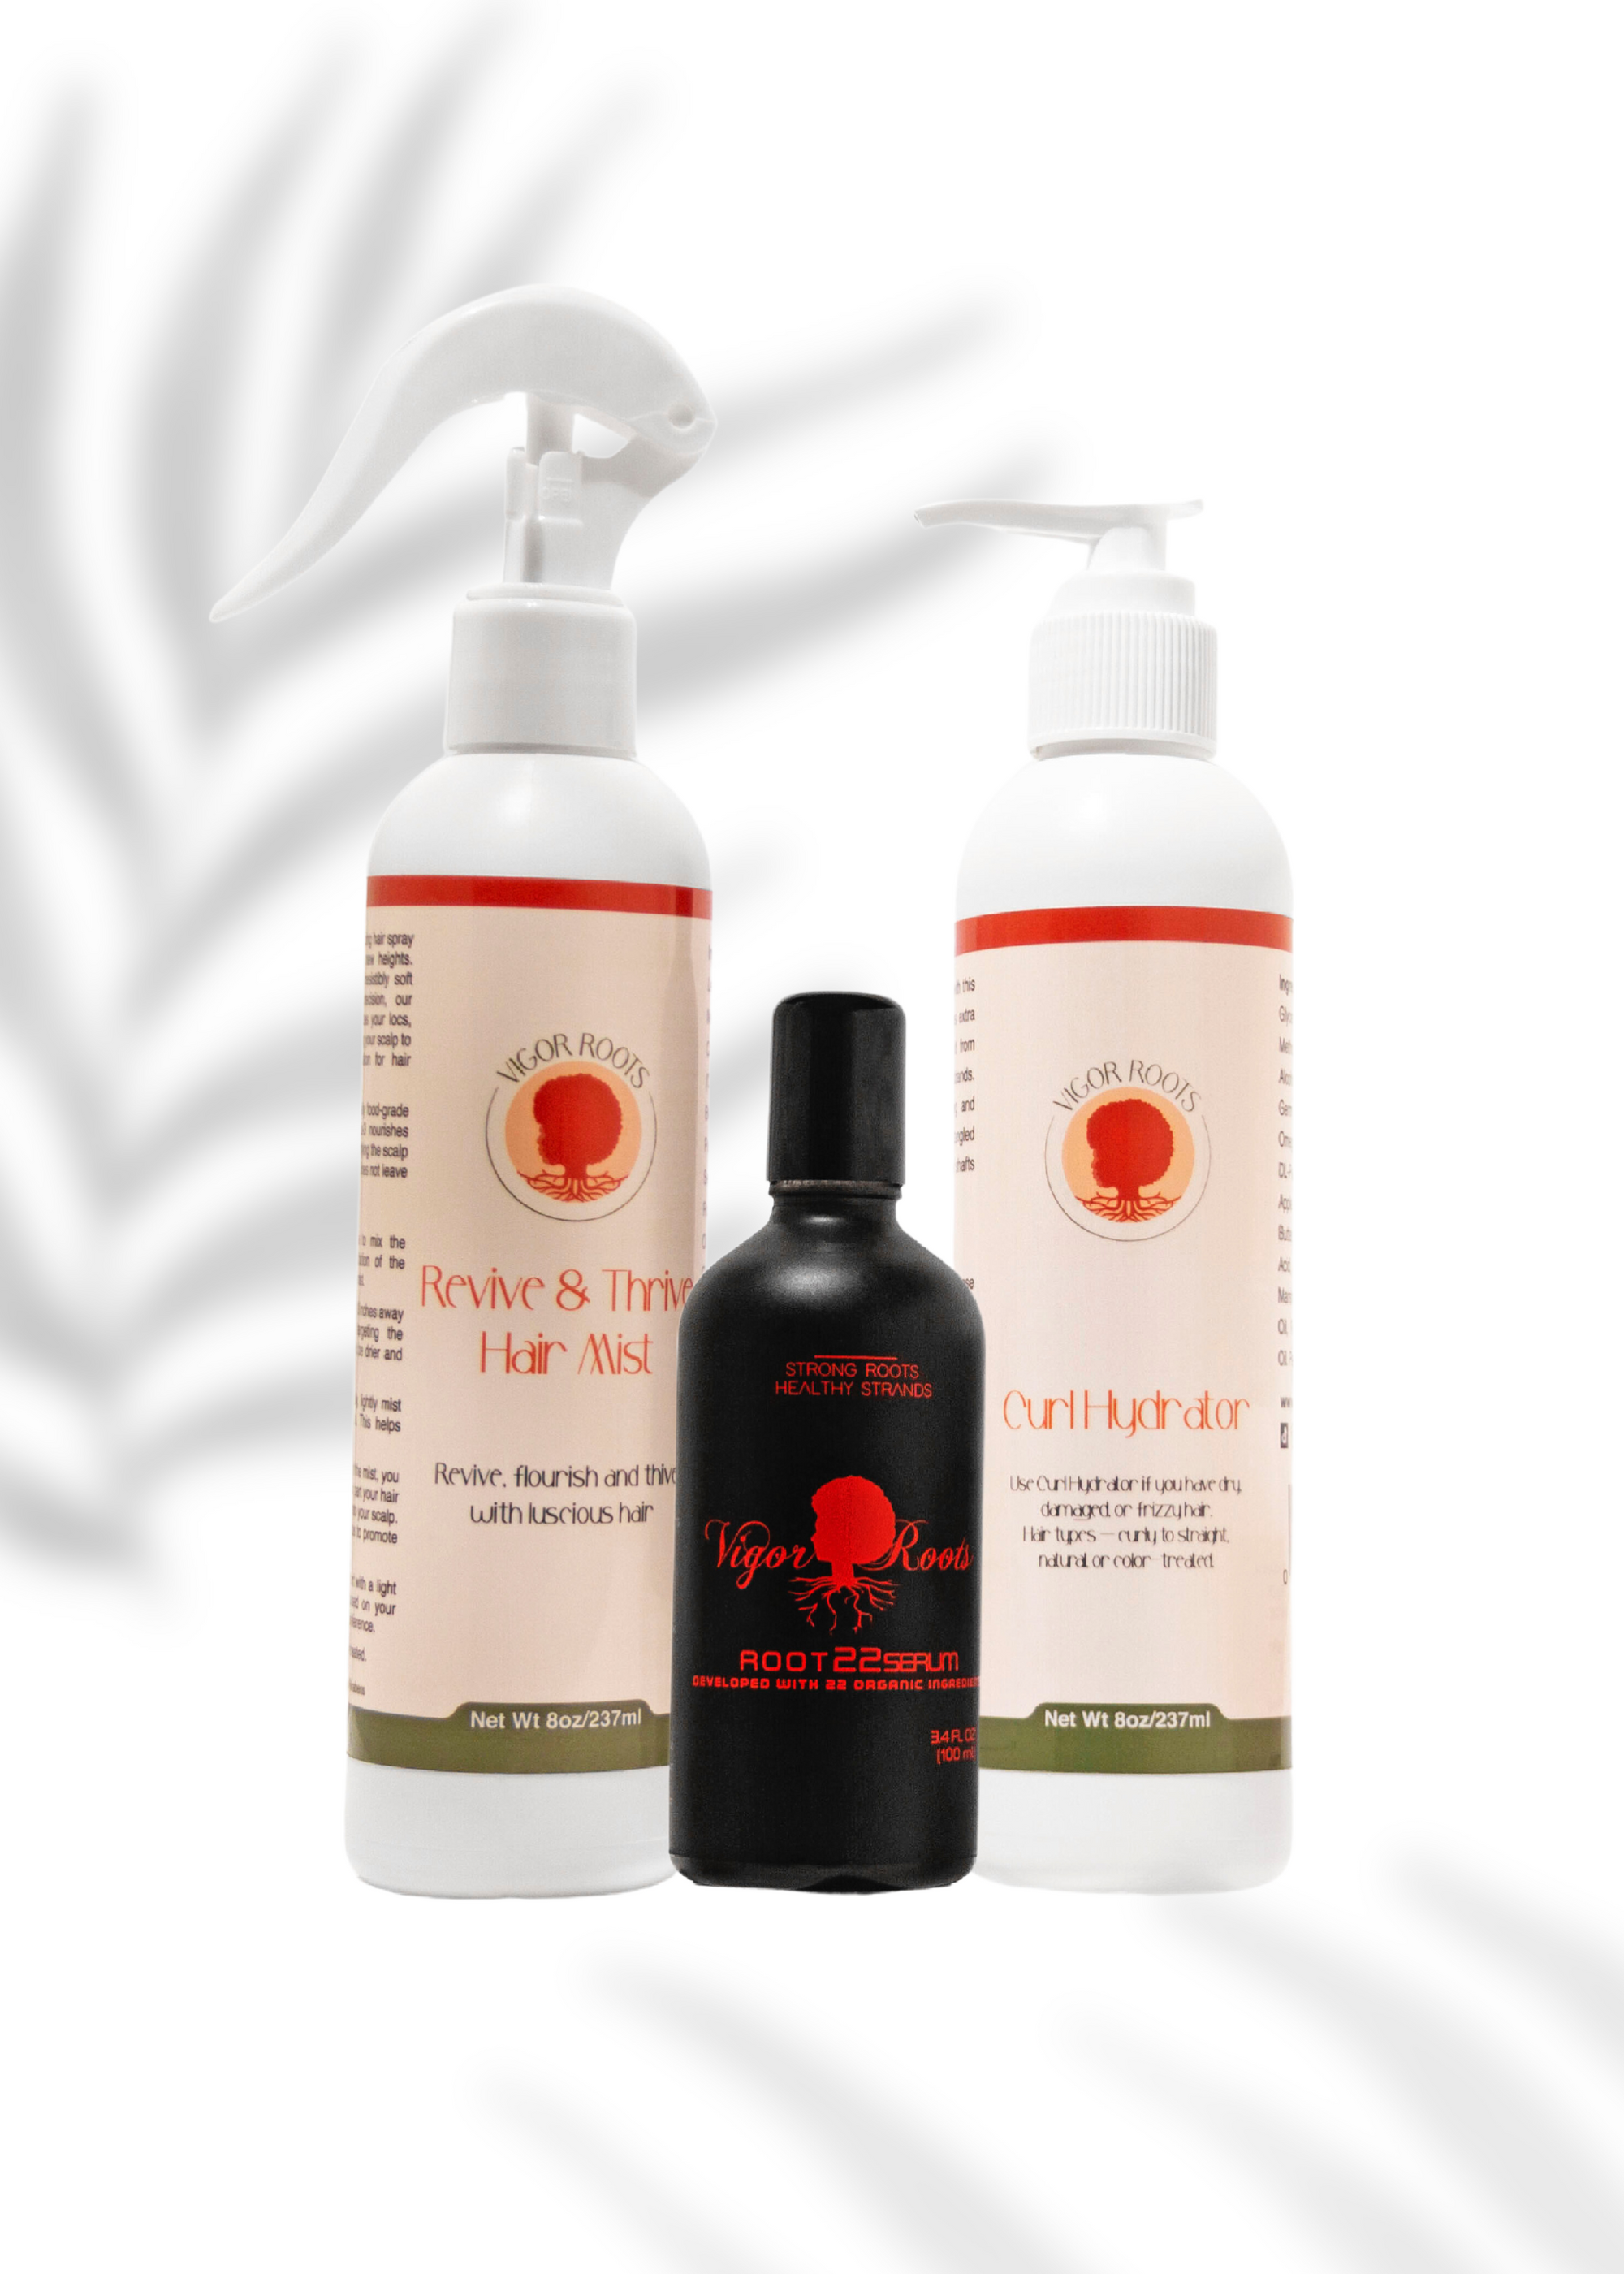 A bright product photo shows off the Vigor Roots Style Bundle: everything you need for a hydrated, healthy, gorgeous crown. The package includes the Revive & Thrive Hair Mist moisturizing spray, the Curl Hydrator Leave-In Conditioner, and the OG fave: Root22Serum to keep your scalp healthy and happy.